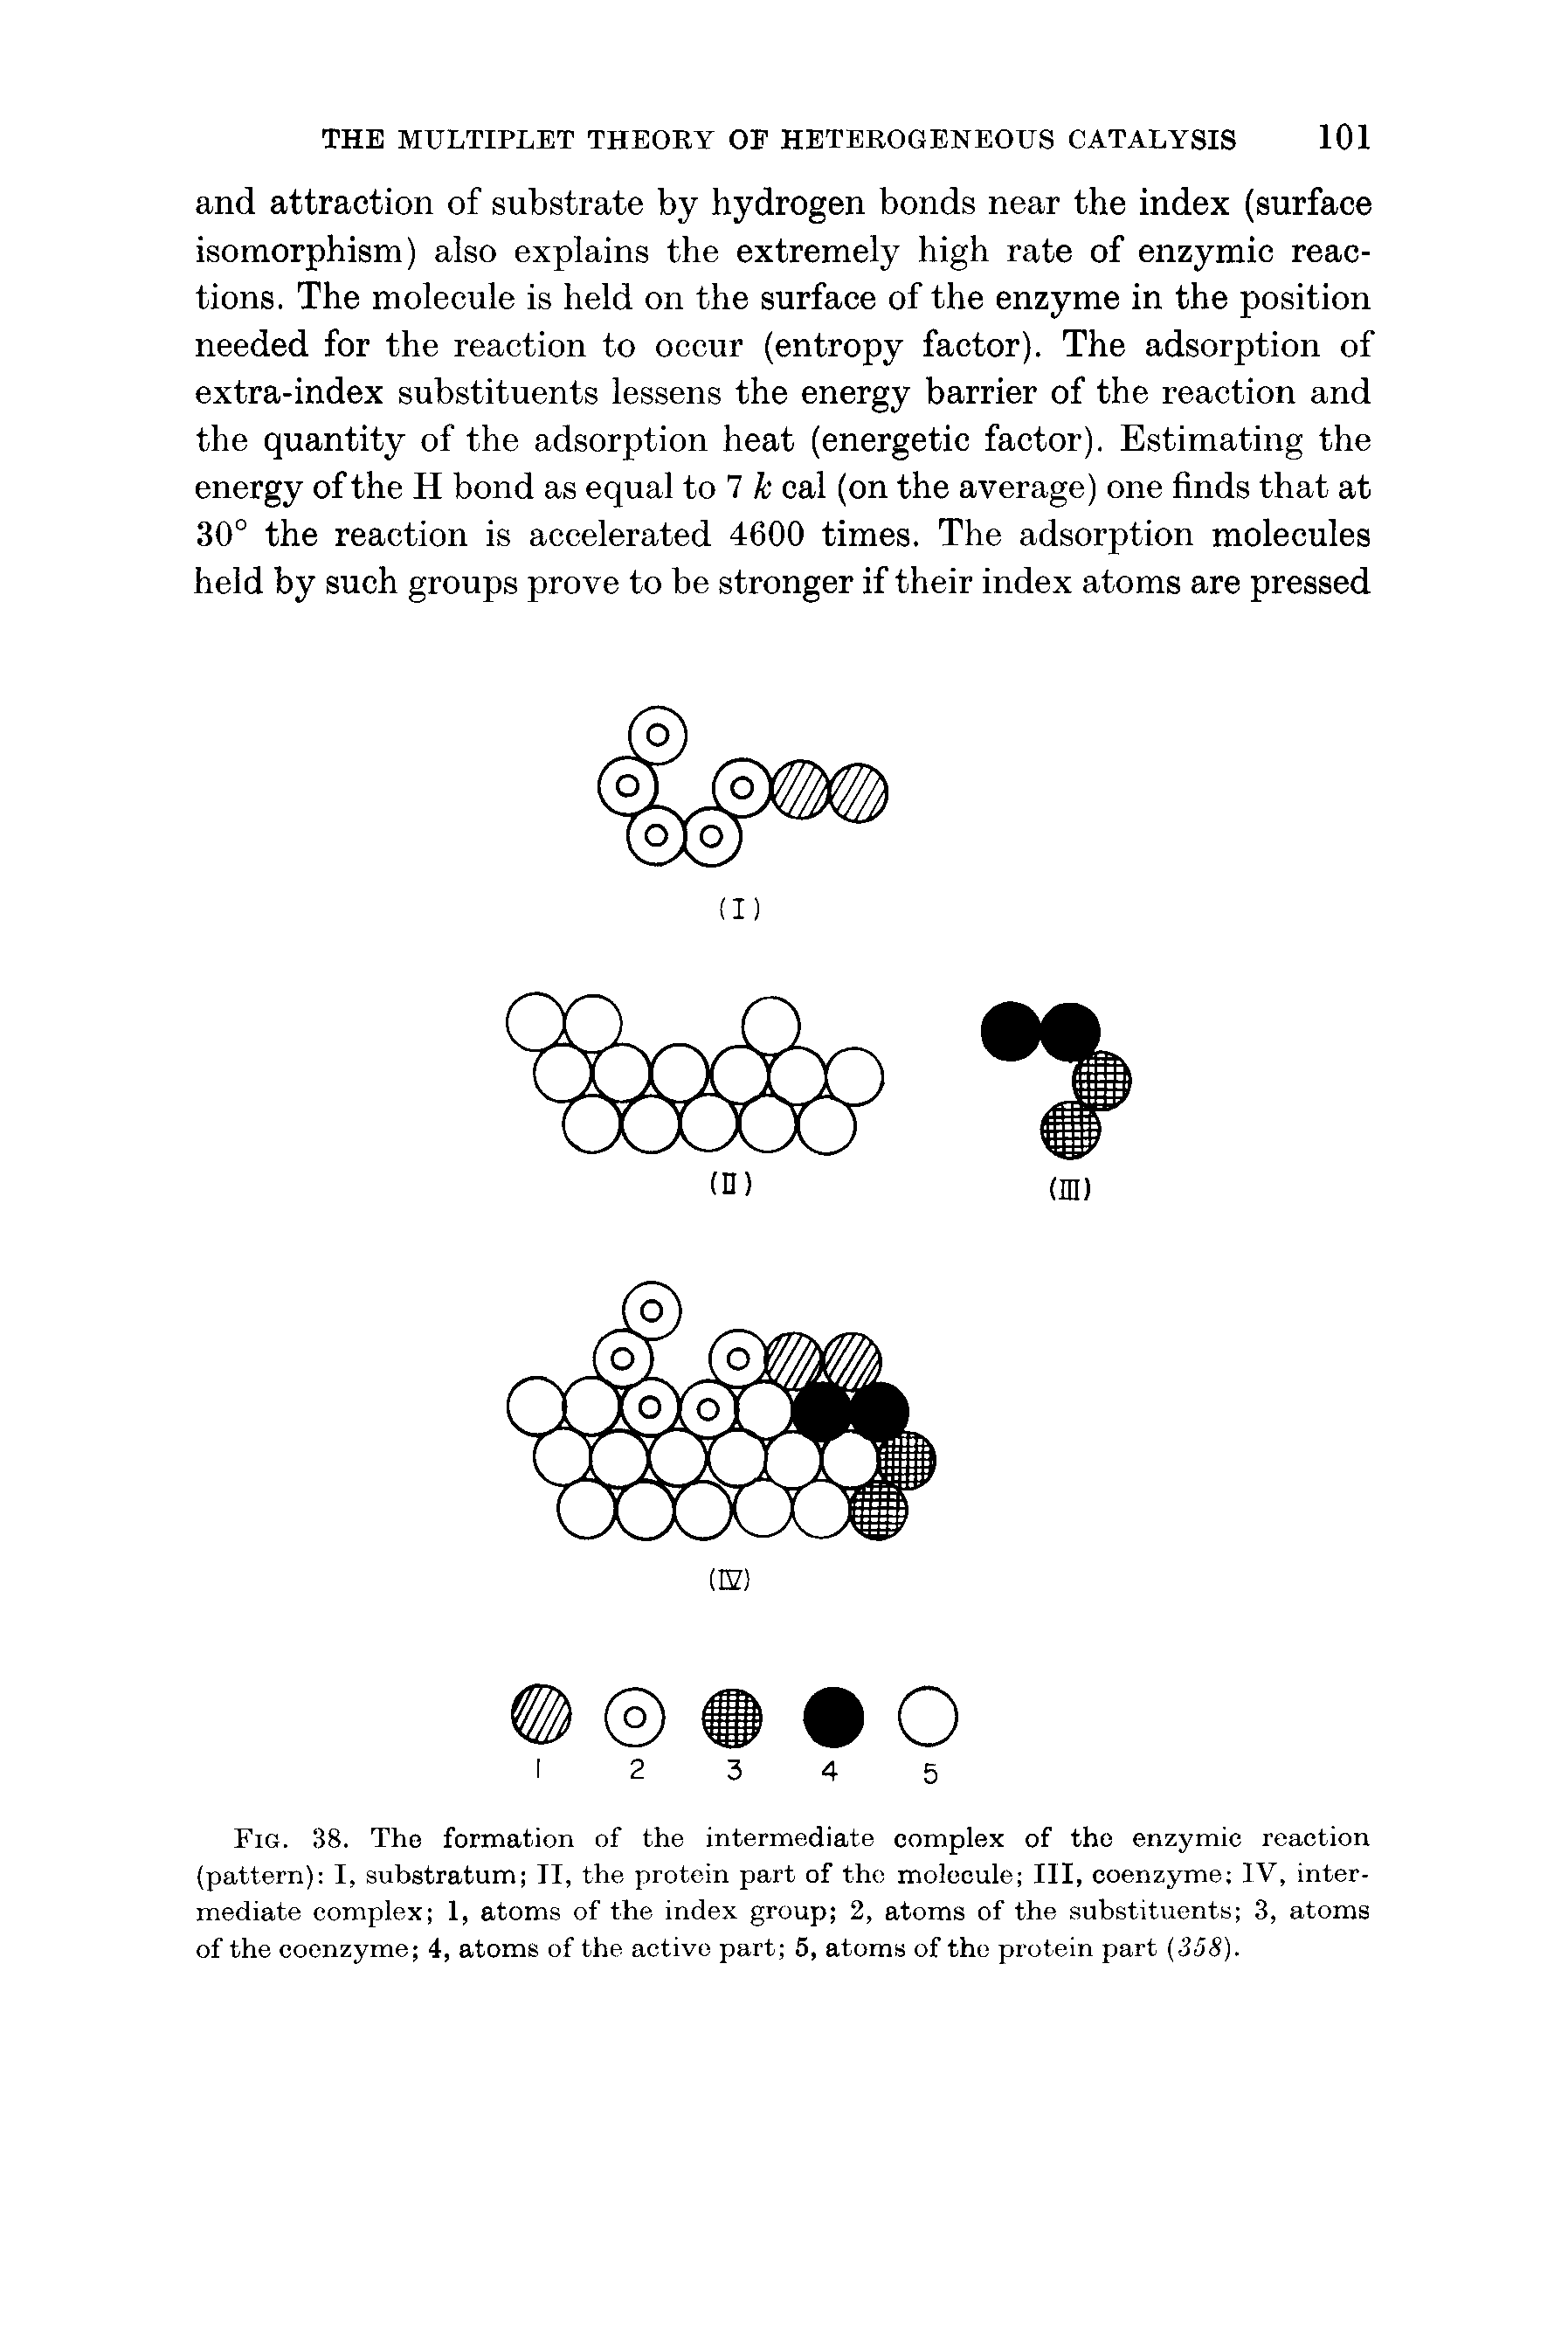 Fig. 38. Tho formation of the intermediate complex of the enzymic reaction (pattern) I, substratum II, the protein part of the molecule III, coenzyme IV, intermediate complex 1, atoms of the index group 2, atoms of the substituents 3, atoms of the coenzyme 4, atoms of the active part 5, atoms of the protein part (35S).